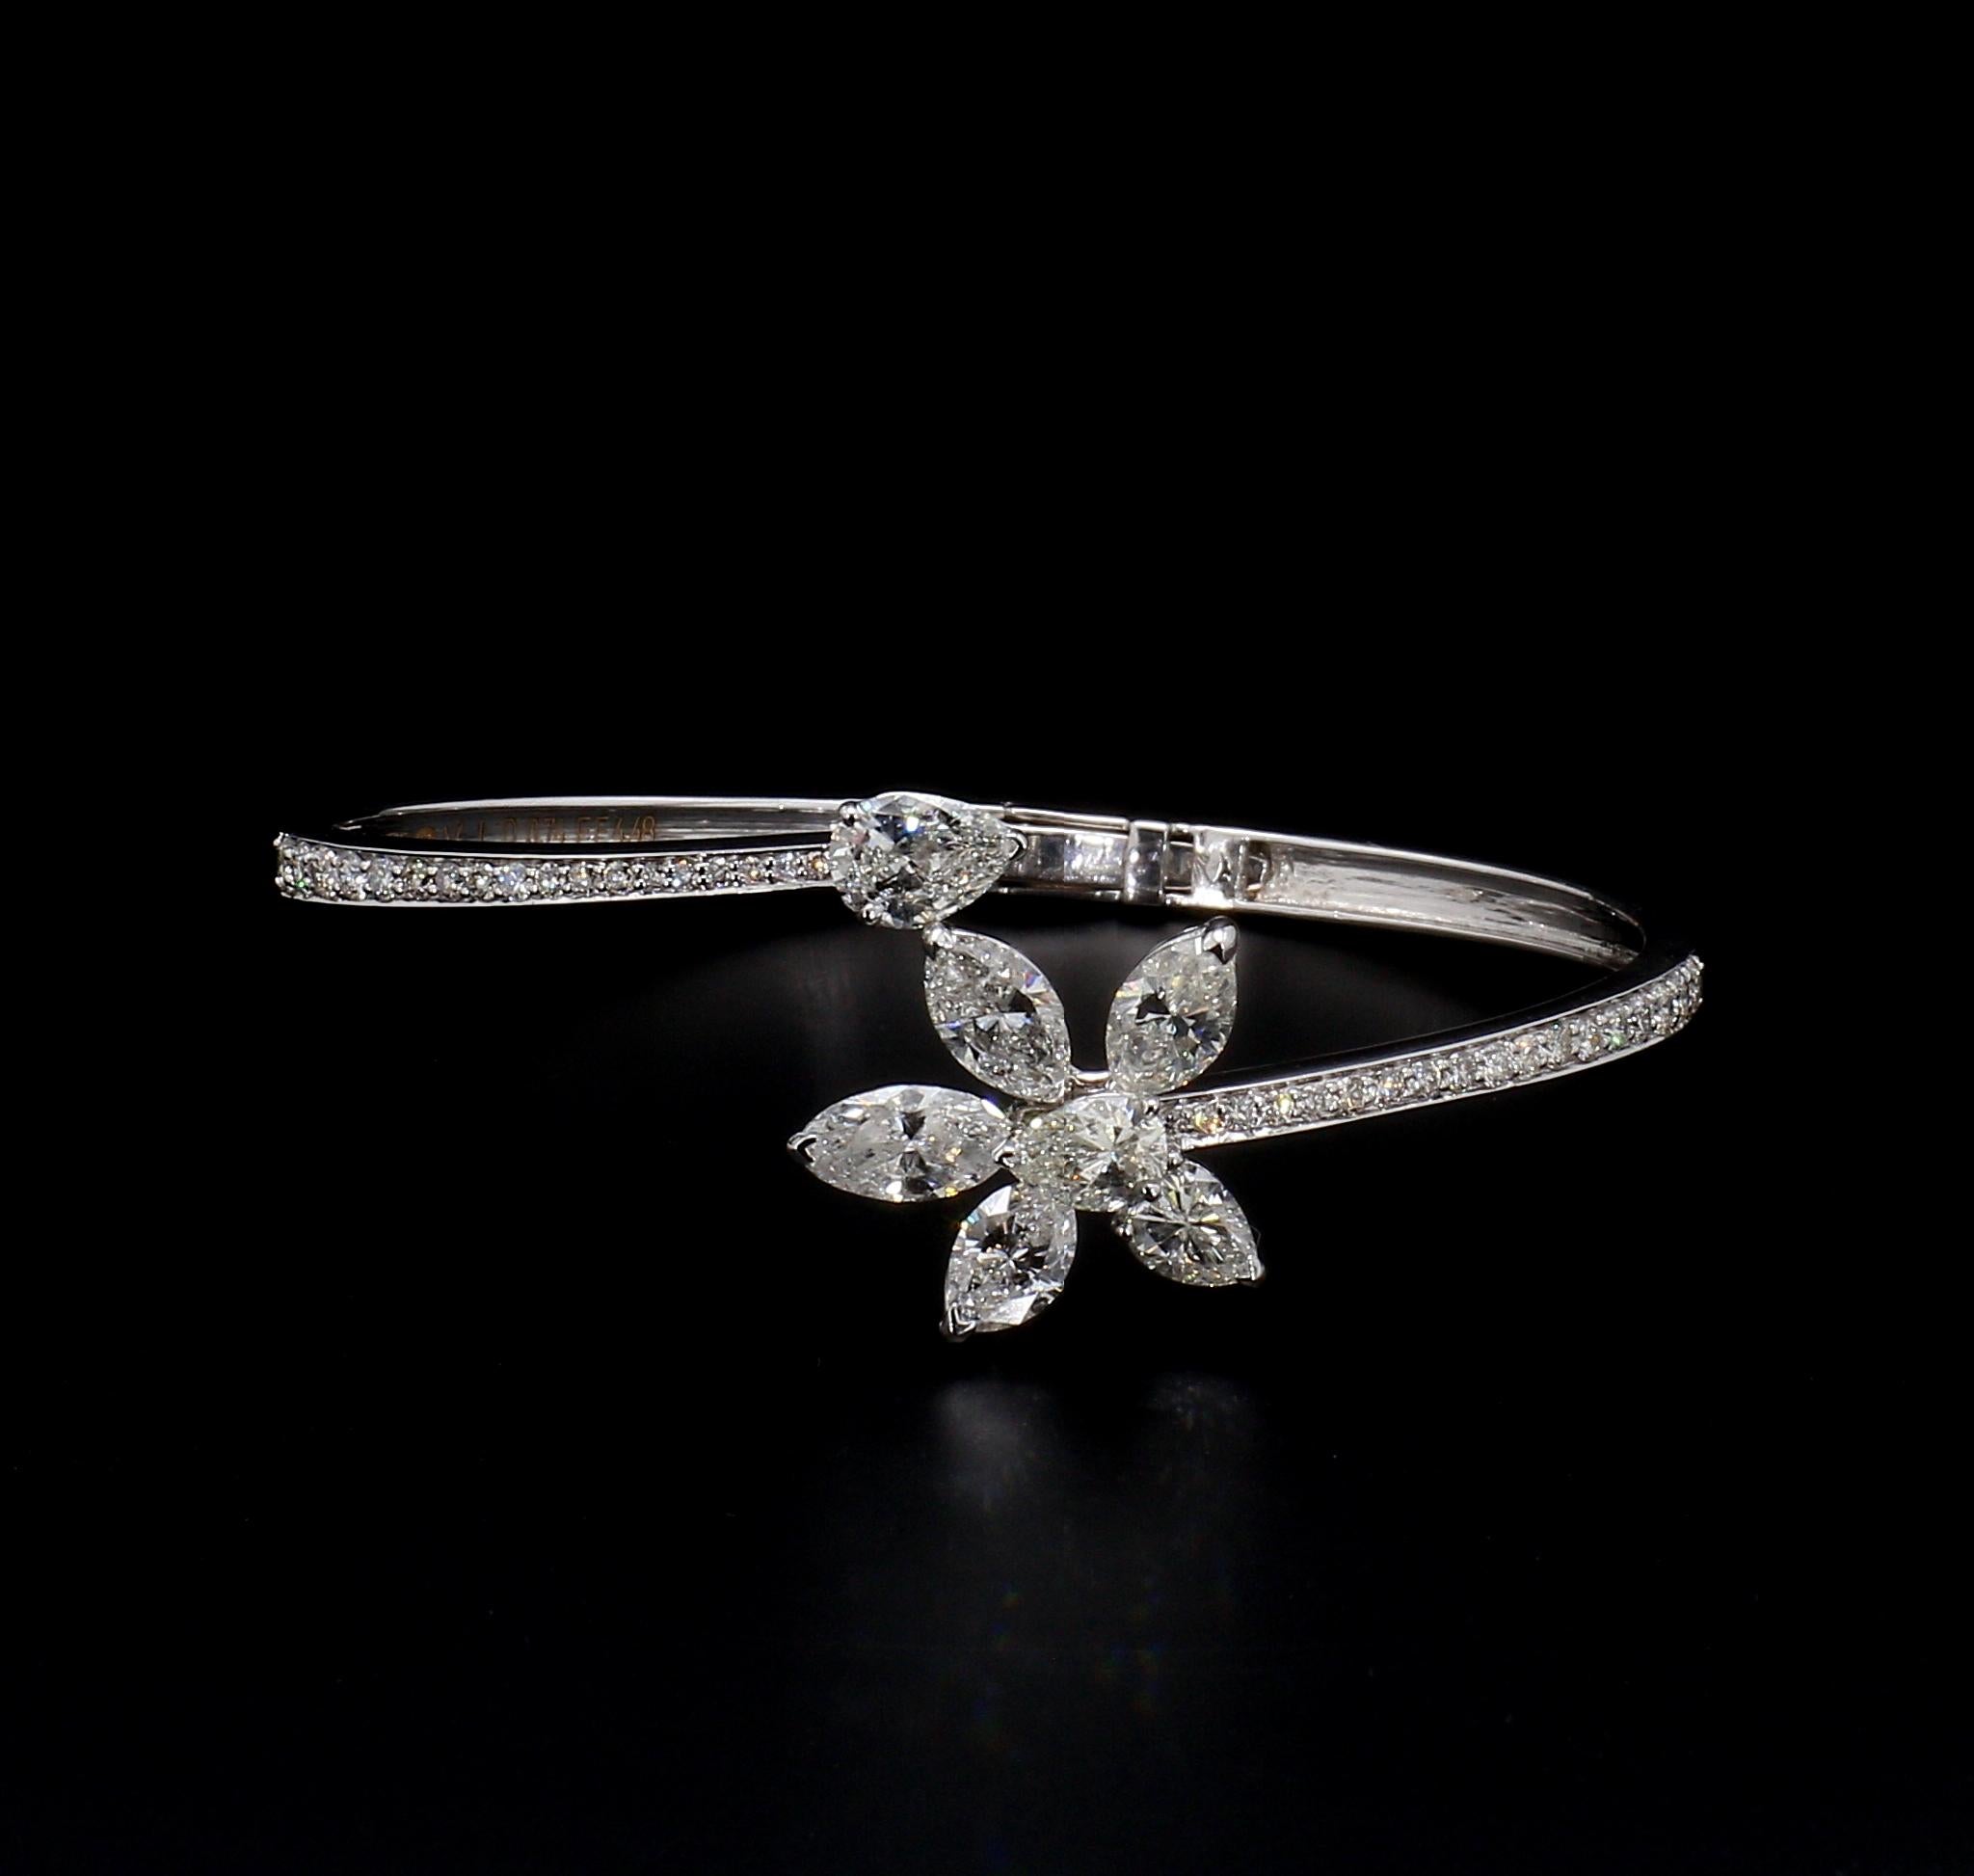 Women's or Men's Floral Bangle with 5.22 Carat Marquise and Round Diamonds in 14k White Gold